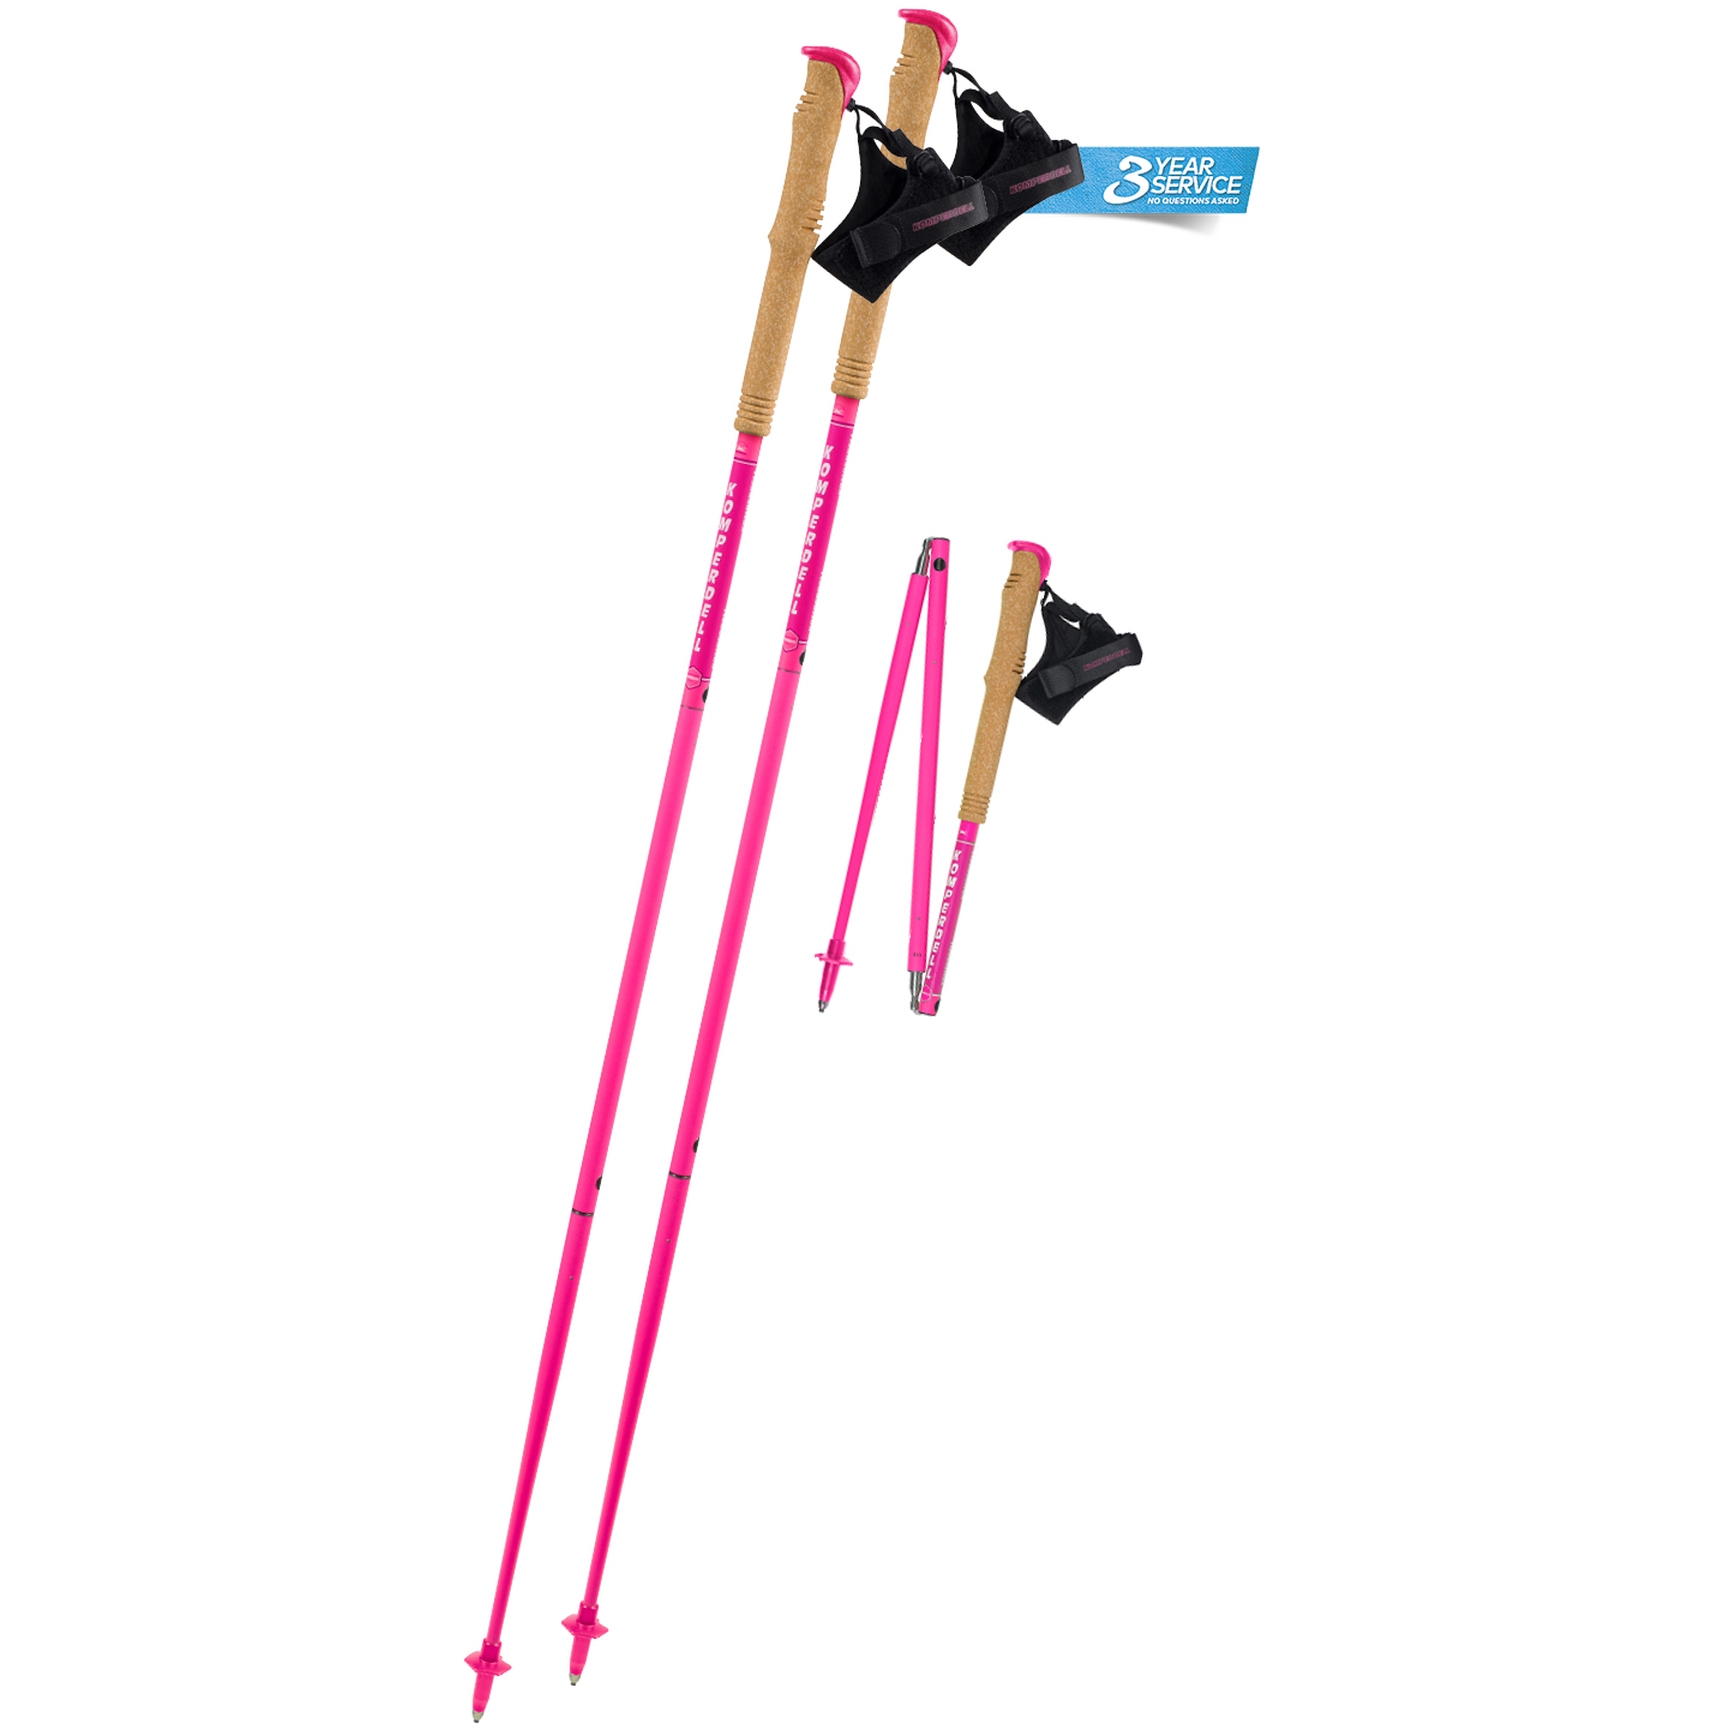 Picture of Komperdell Carbon FXP Team Pink Trailrunning Poles (Pair) - pink